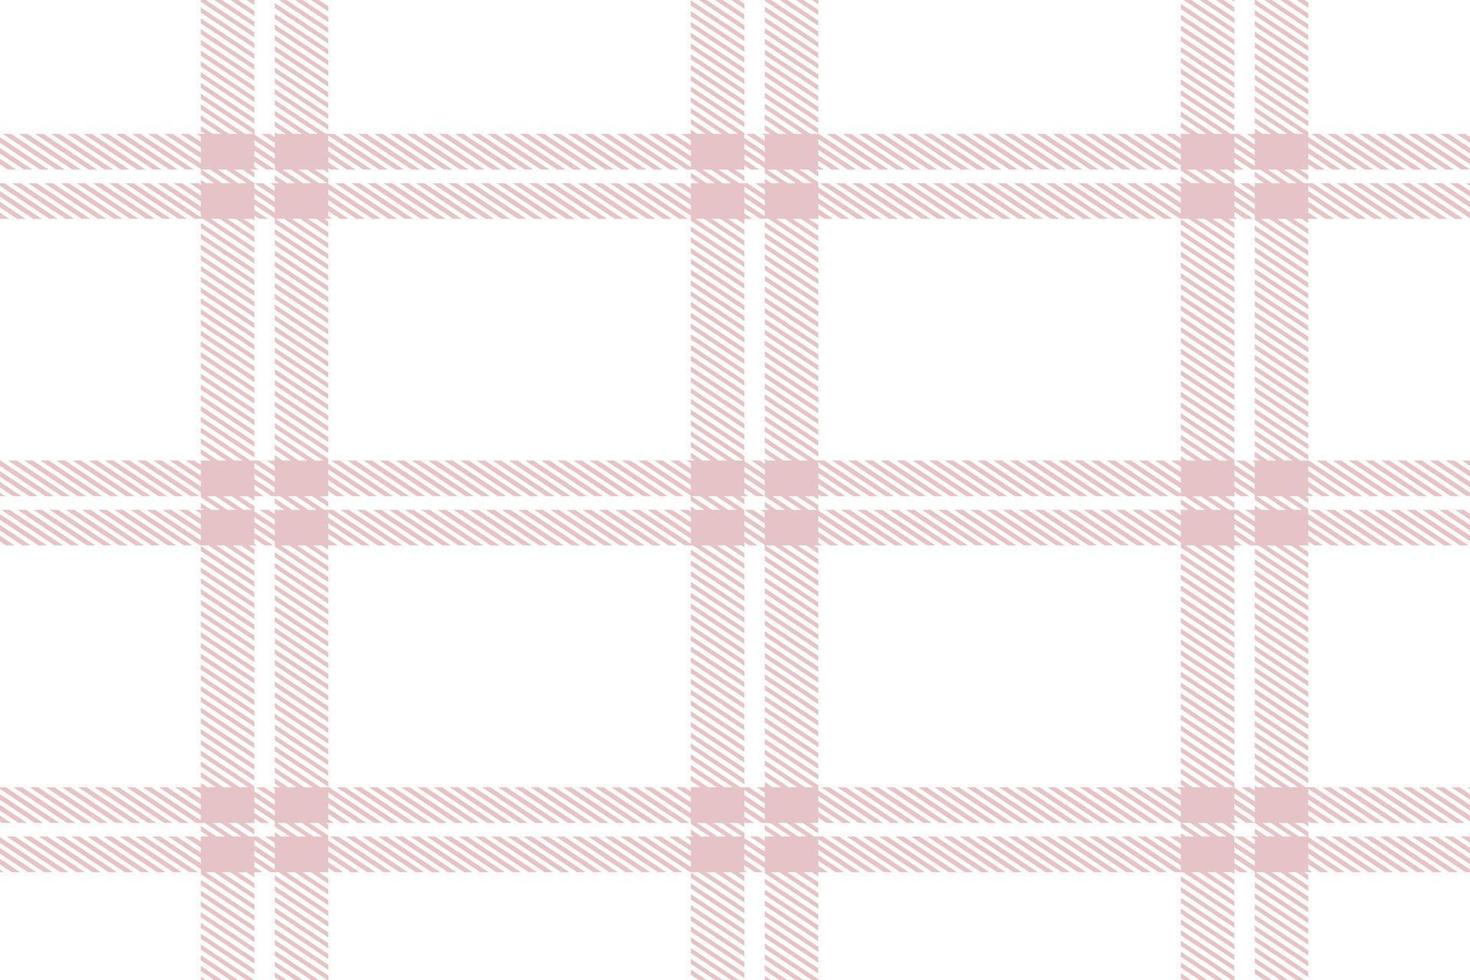 Purple Plaid Pattern Seamless Textile the Resulting Blocks of Colour Repeat Vertically and Horizontally in a Distinctive Pattern of Squares and Lines Known as a Sett. Tartan Is Plaid vector